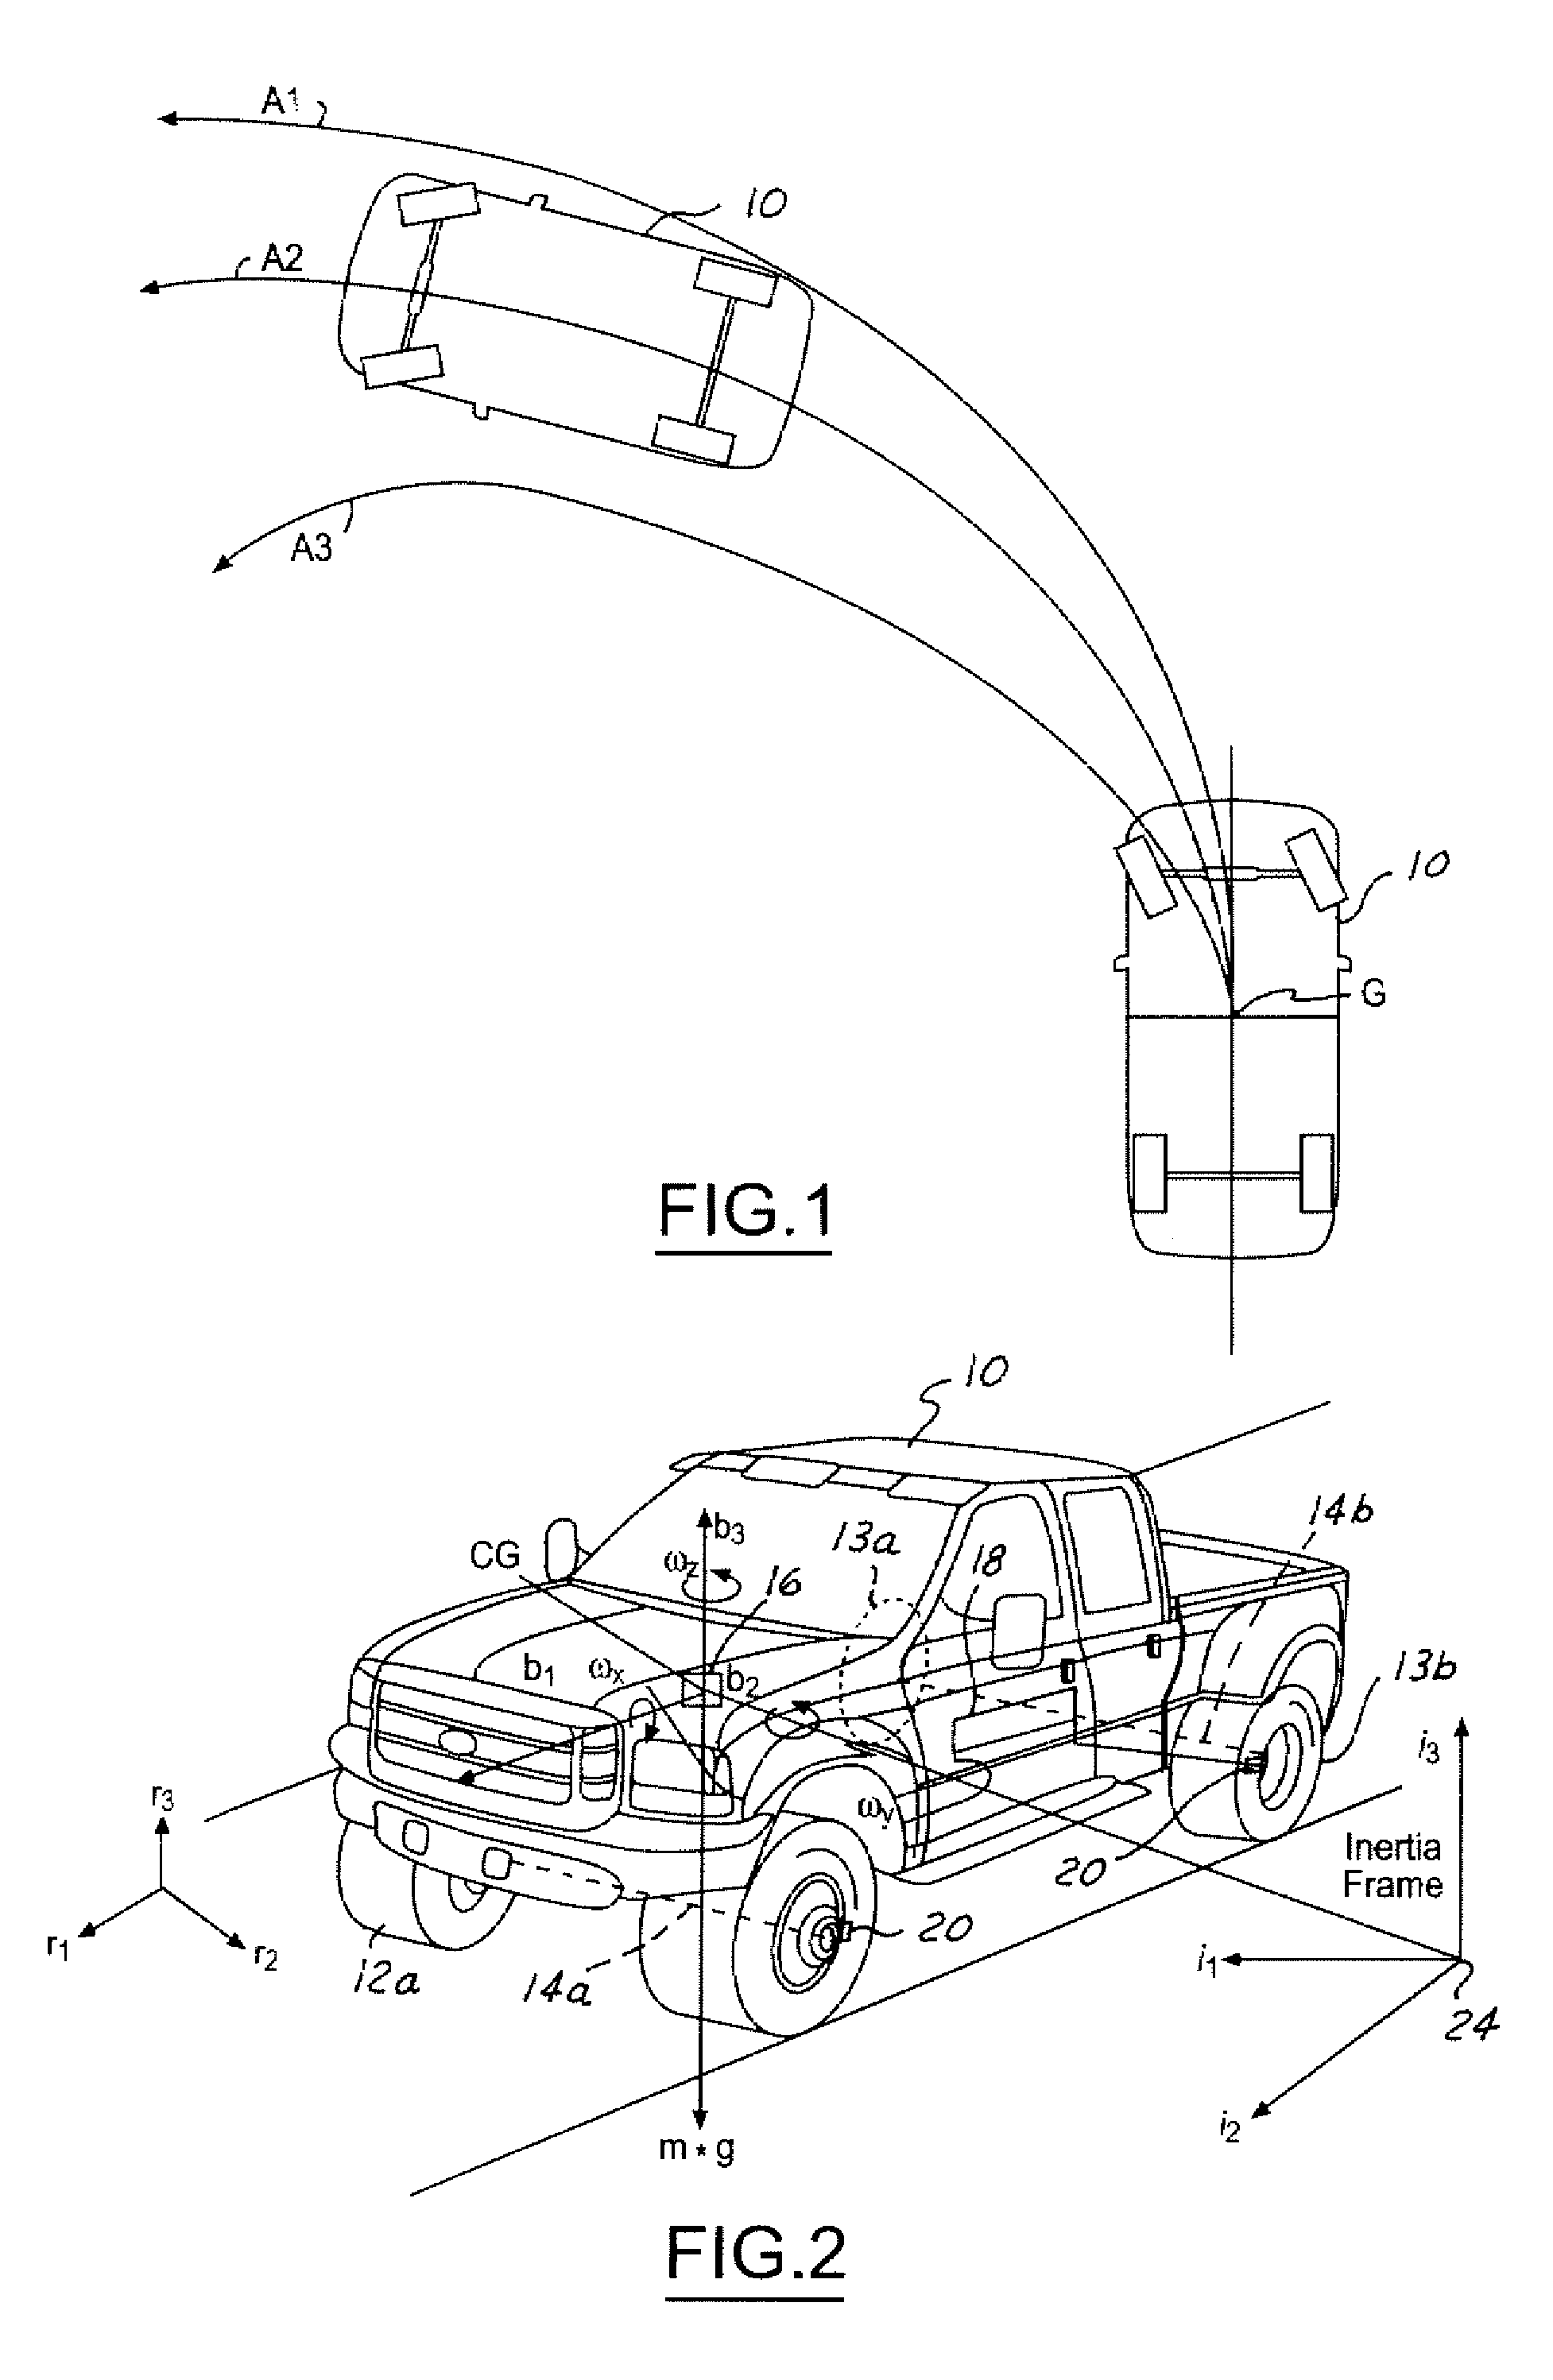 Method and apparatus of controlling an automotive vehicle using brake-steer as a function of steering wheel torque